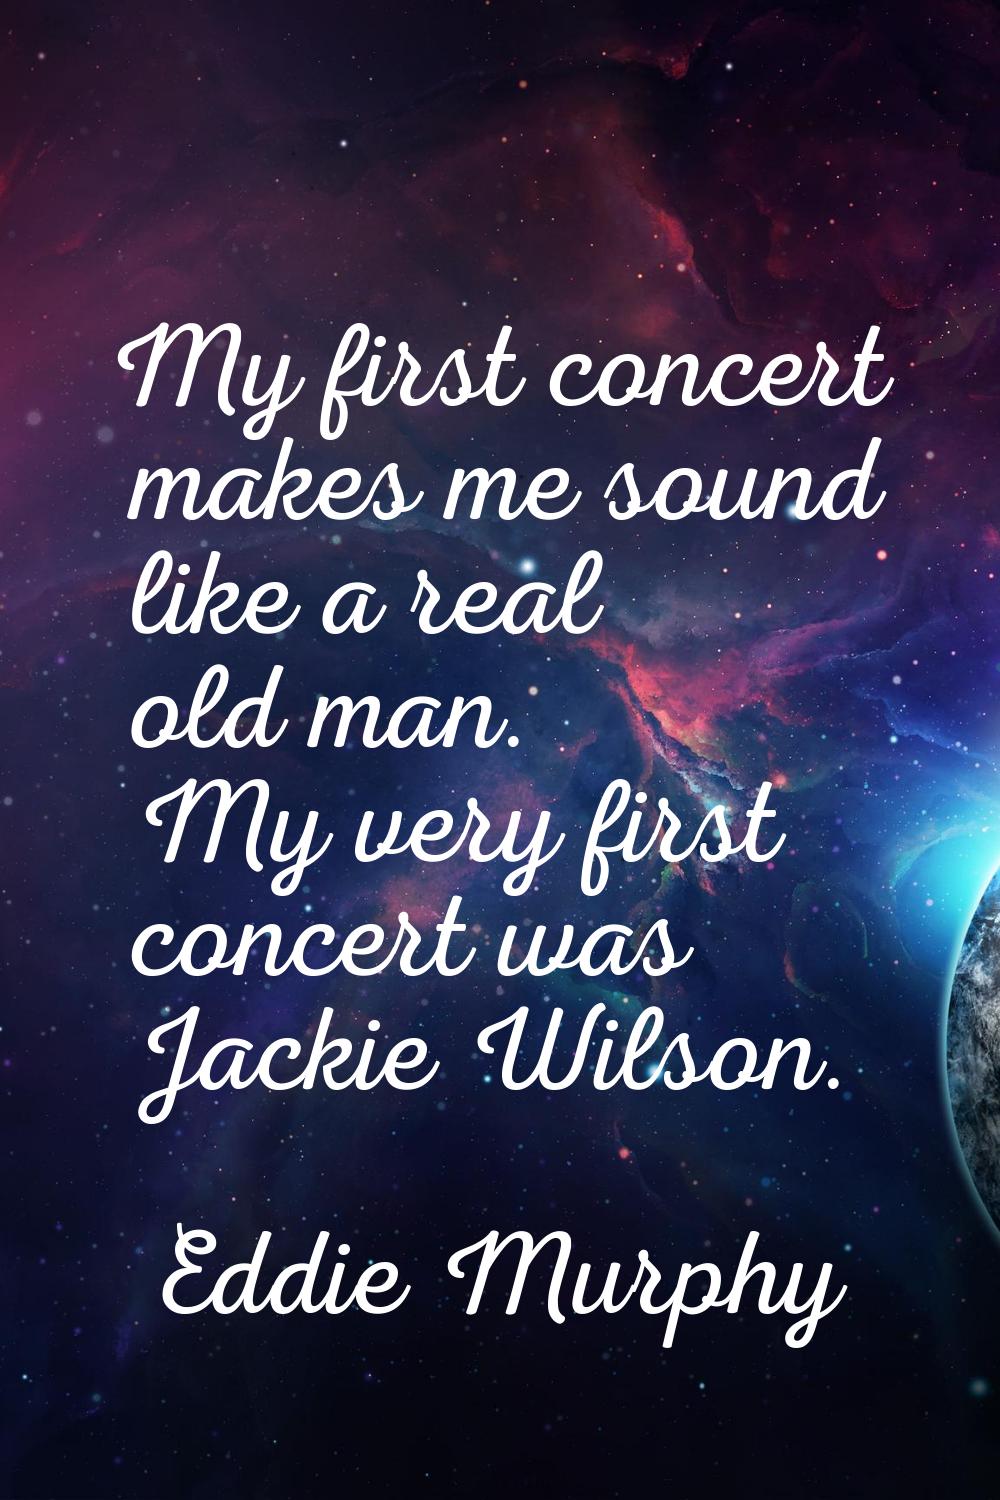 My first concert makes me sound like a real old man. My very first concert was Jackie Wilson.